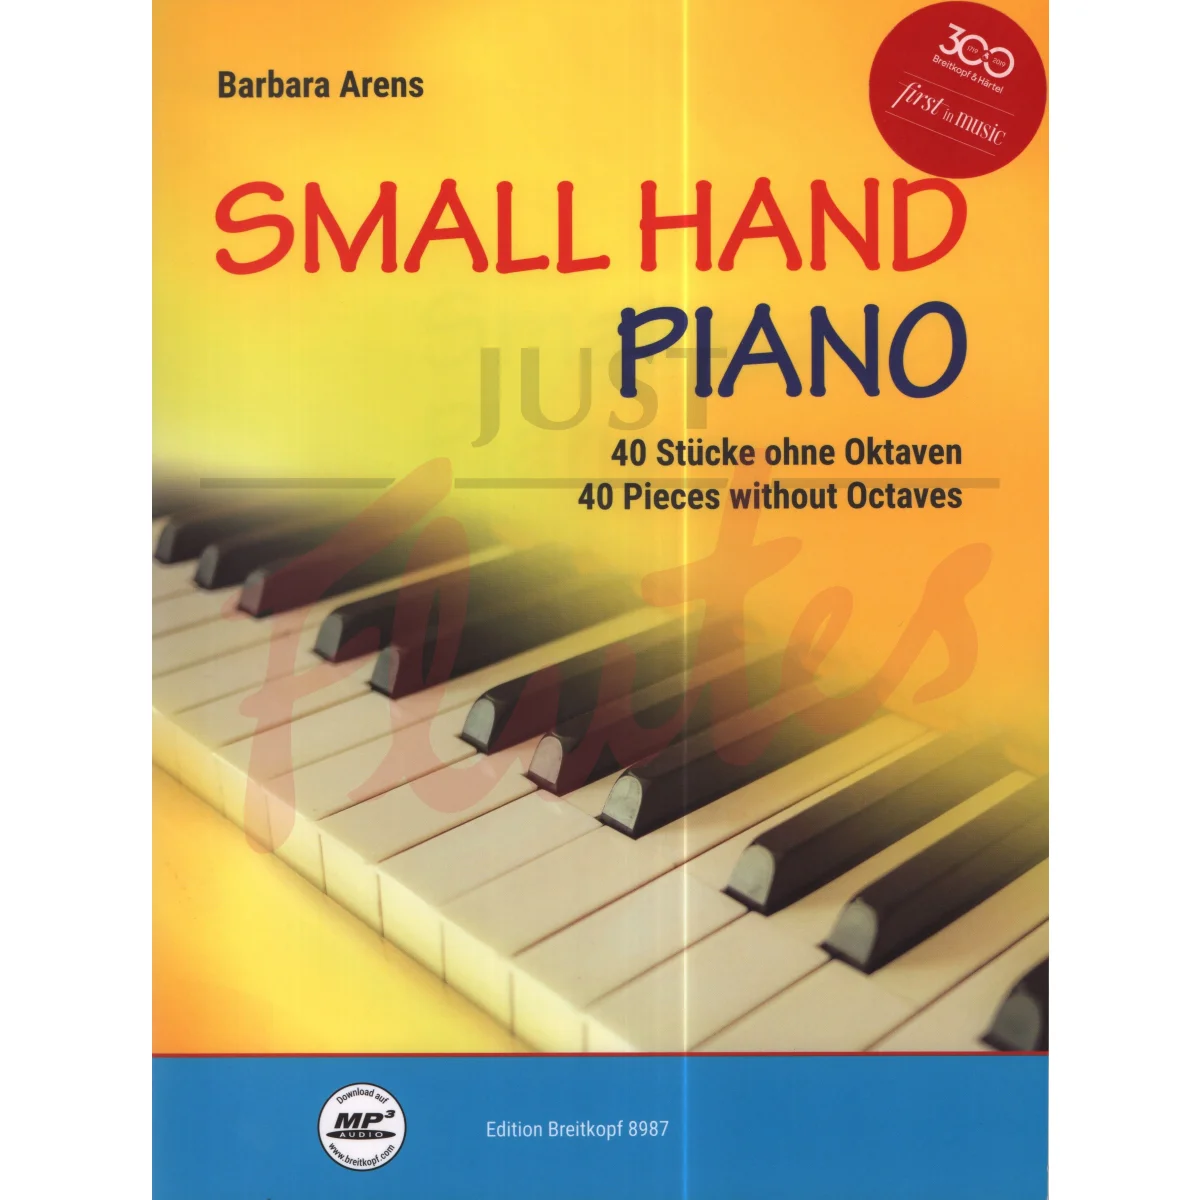 Small Hand Piano - 40 Pieces Without Octaves